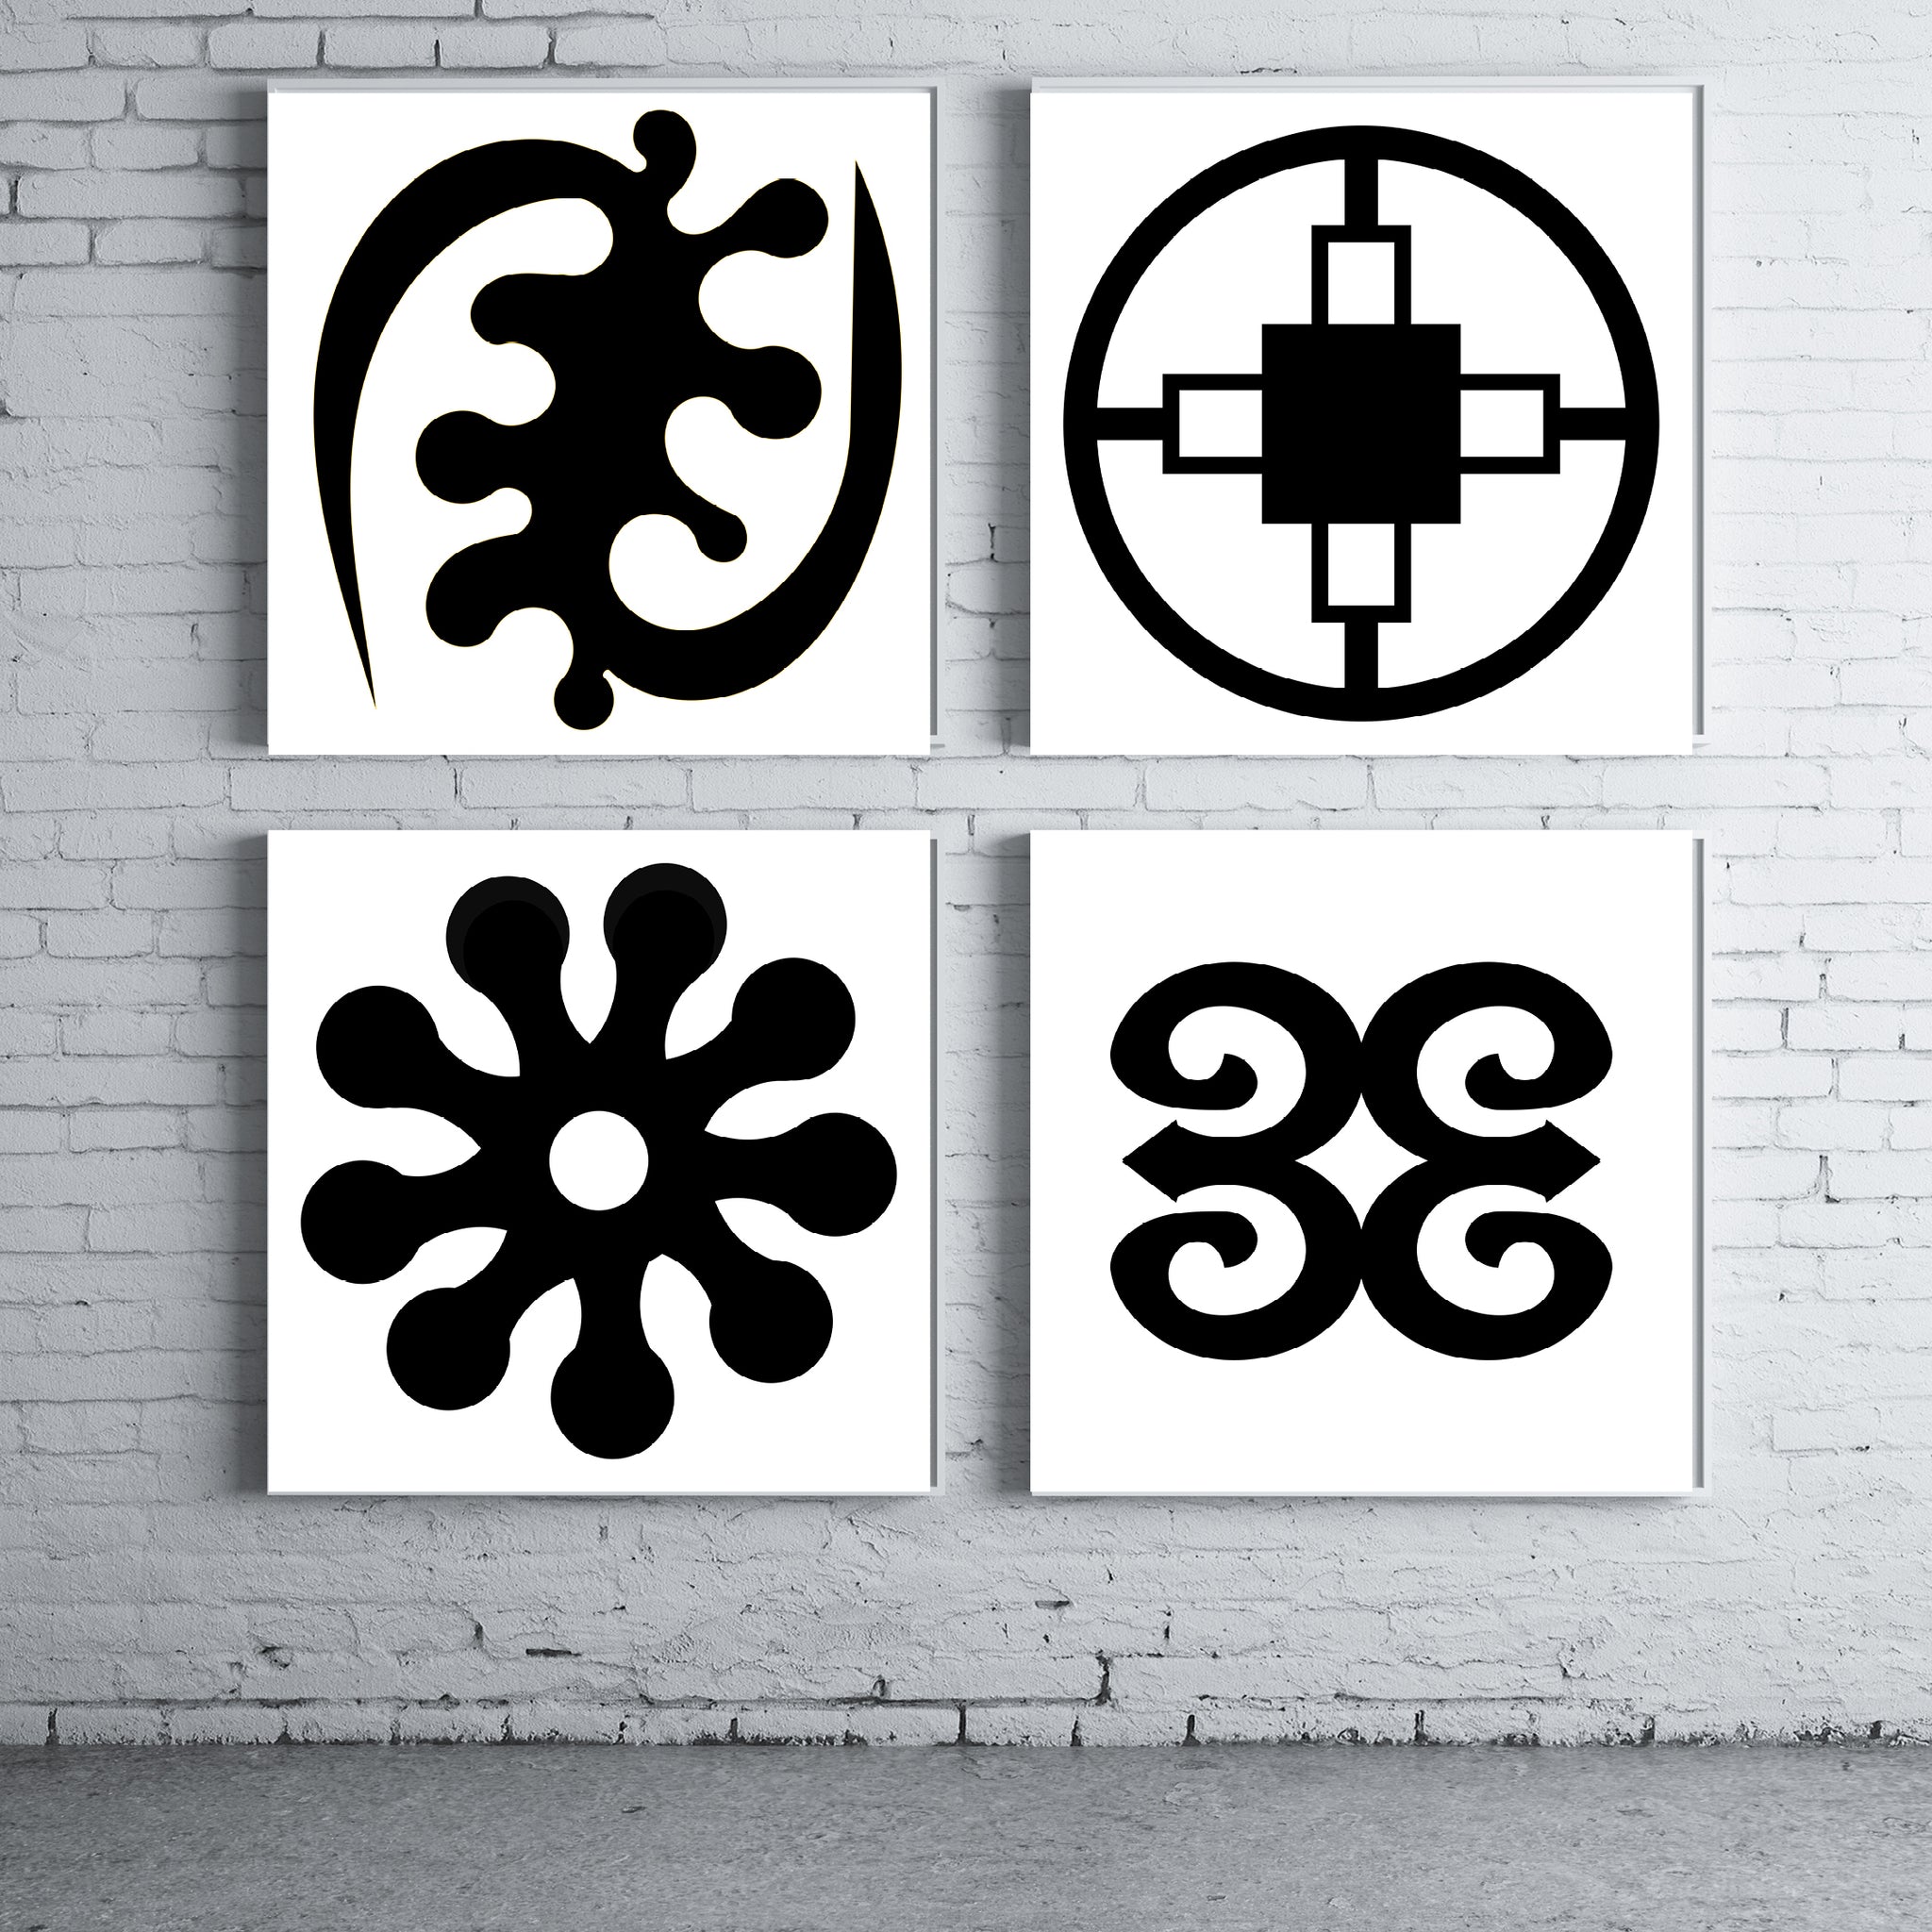 Adinkra Seeds of a plant -  Fine Art Large Print African Symbol - House of Yvette Michele 